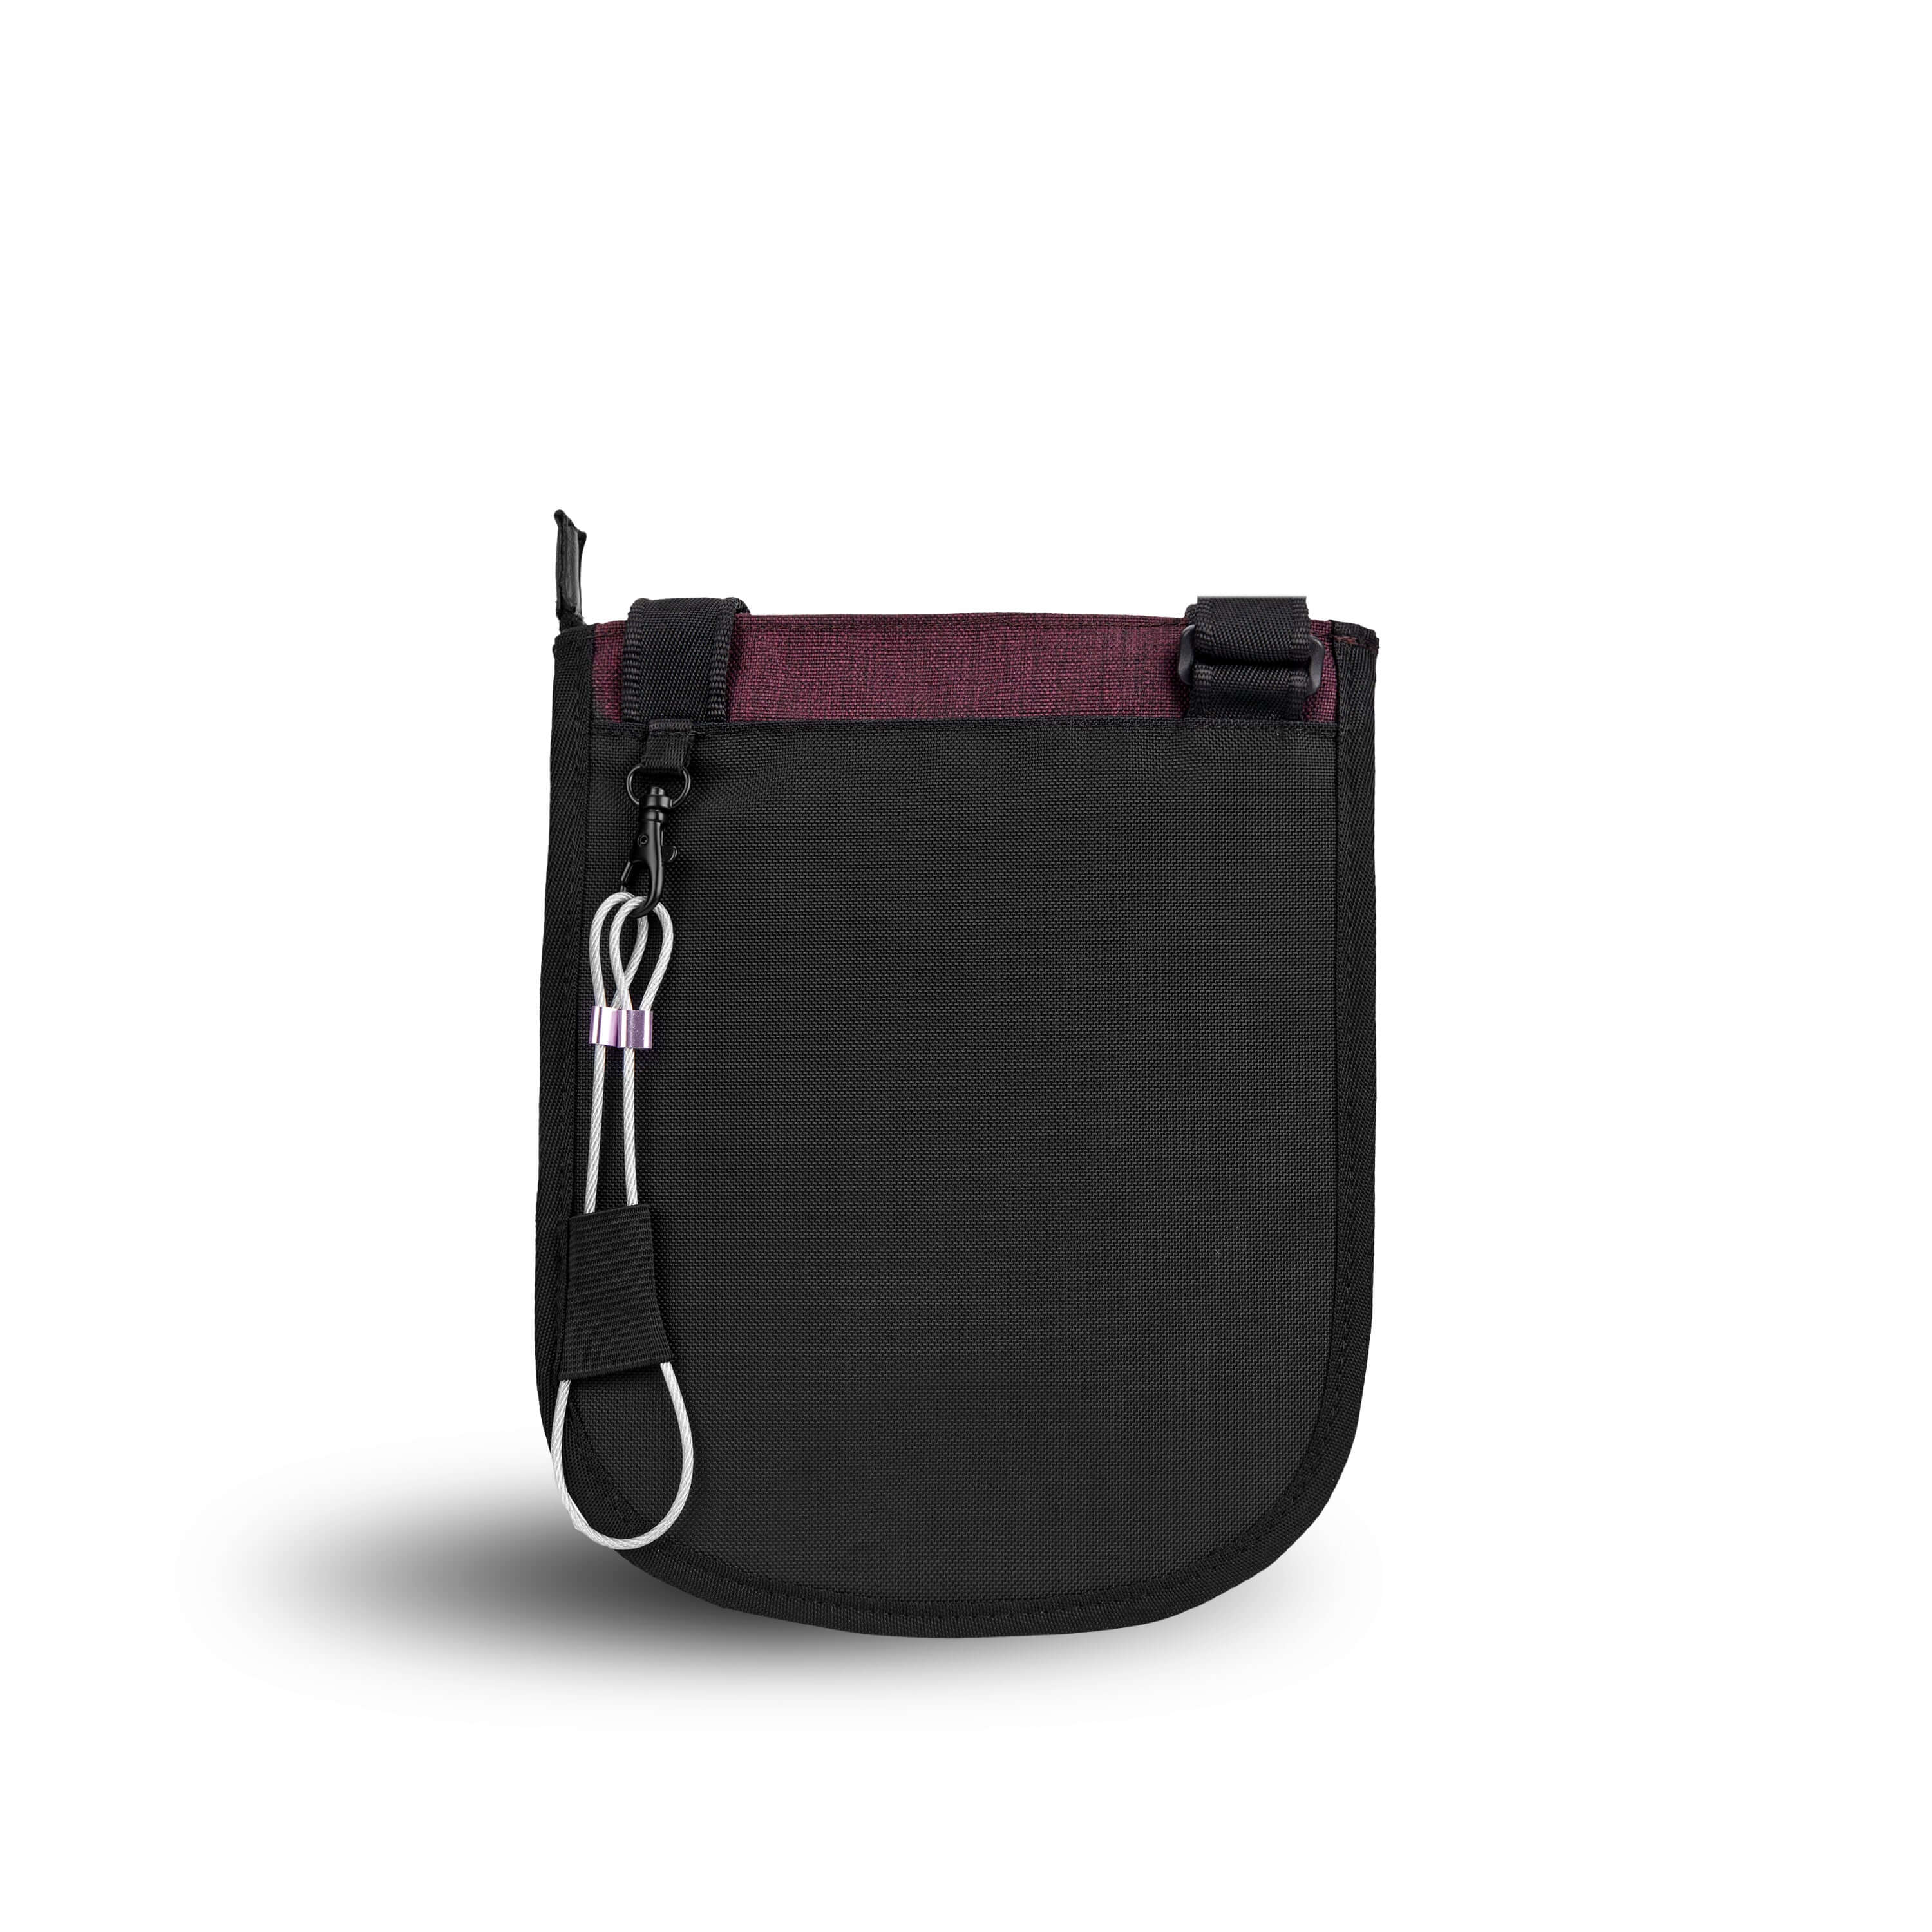 Back view of Sherpani&#39;s Anti-Theft bag, the Prima AT in Merlot, with vegan leather accents in black. There is an external pouch on the back of the bag, and a chair loop lock clipped to the left side that is secured in place with an elastic tab.